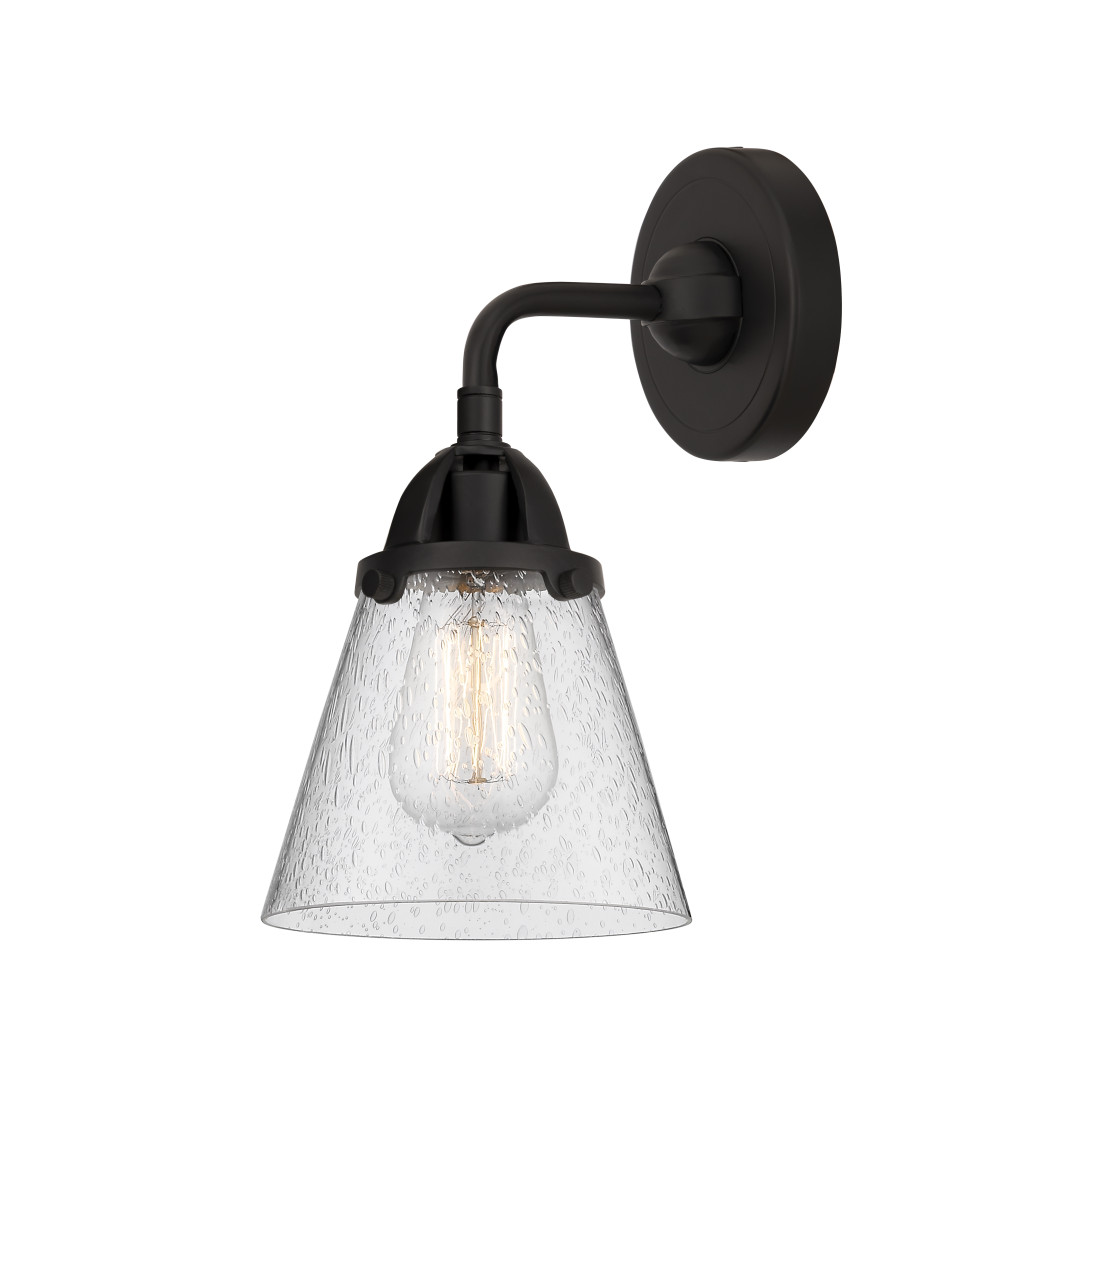 INNOVATIONS LIGHTING 288-1W-BK-G64 Small Cone Sconce